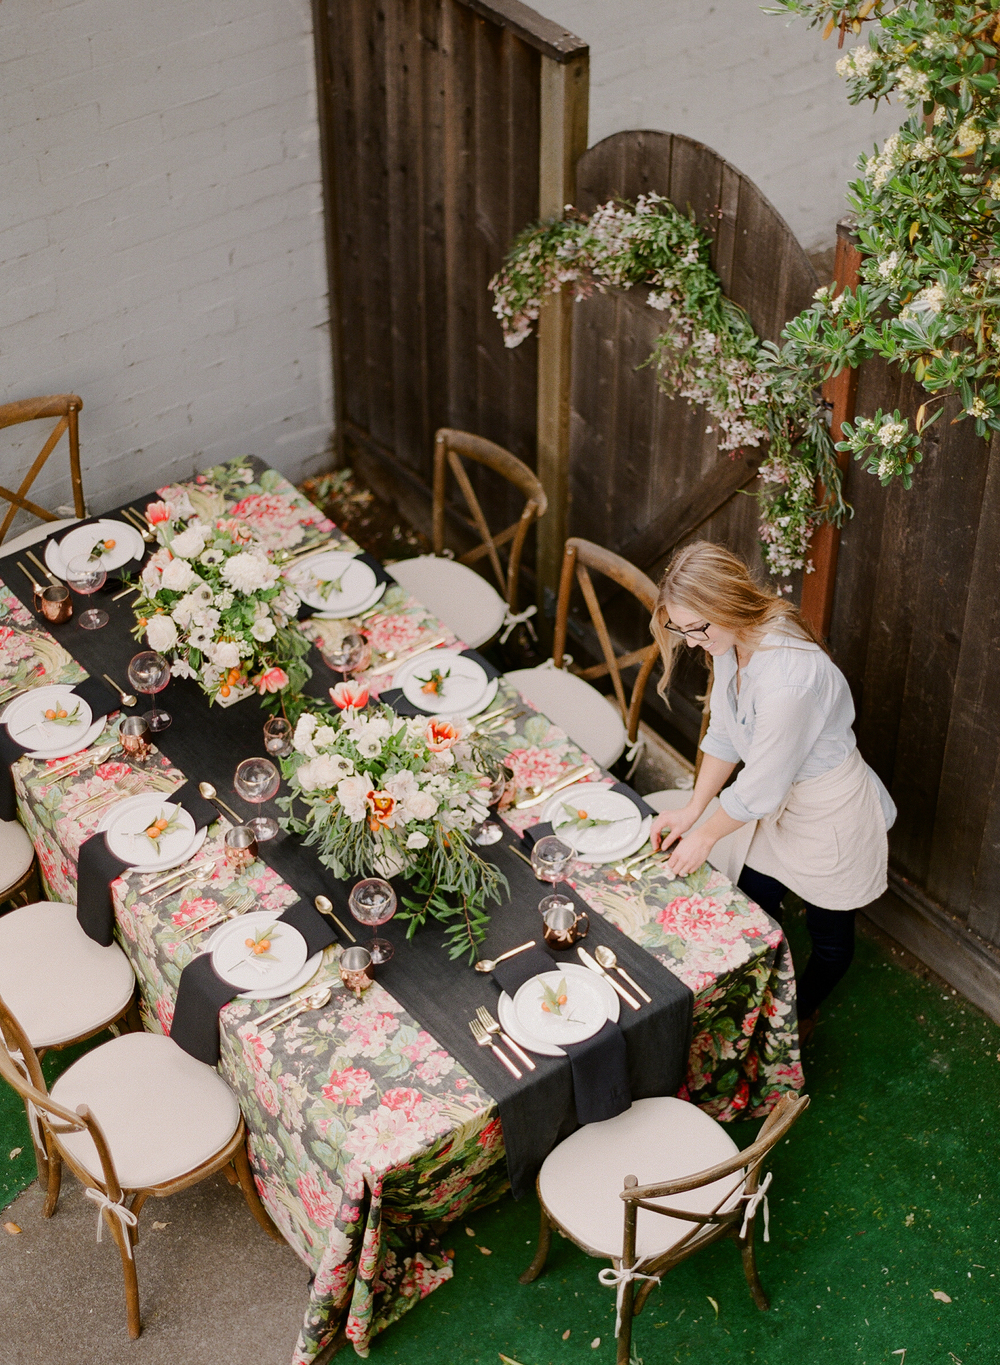 Party planning made easy with effortless outdoor entertaining tips form boxwoodavenue.com | kevin chin photography